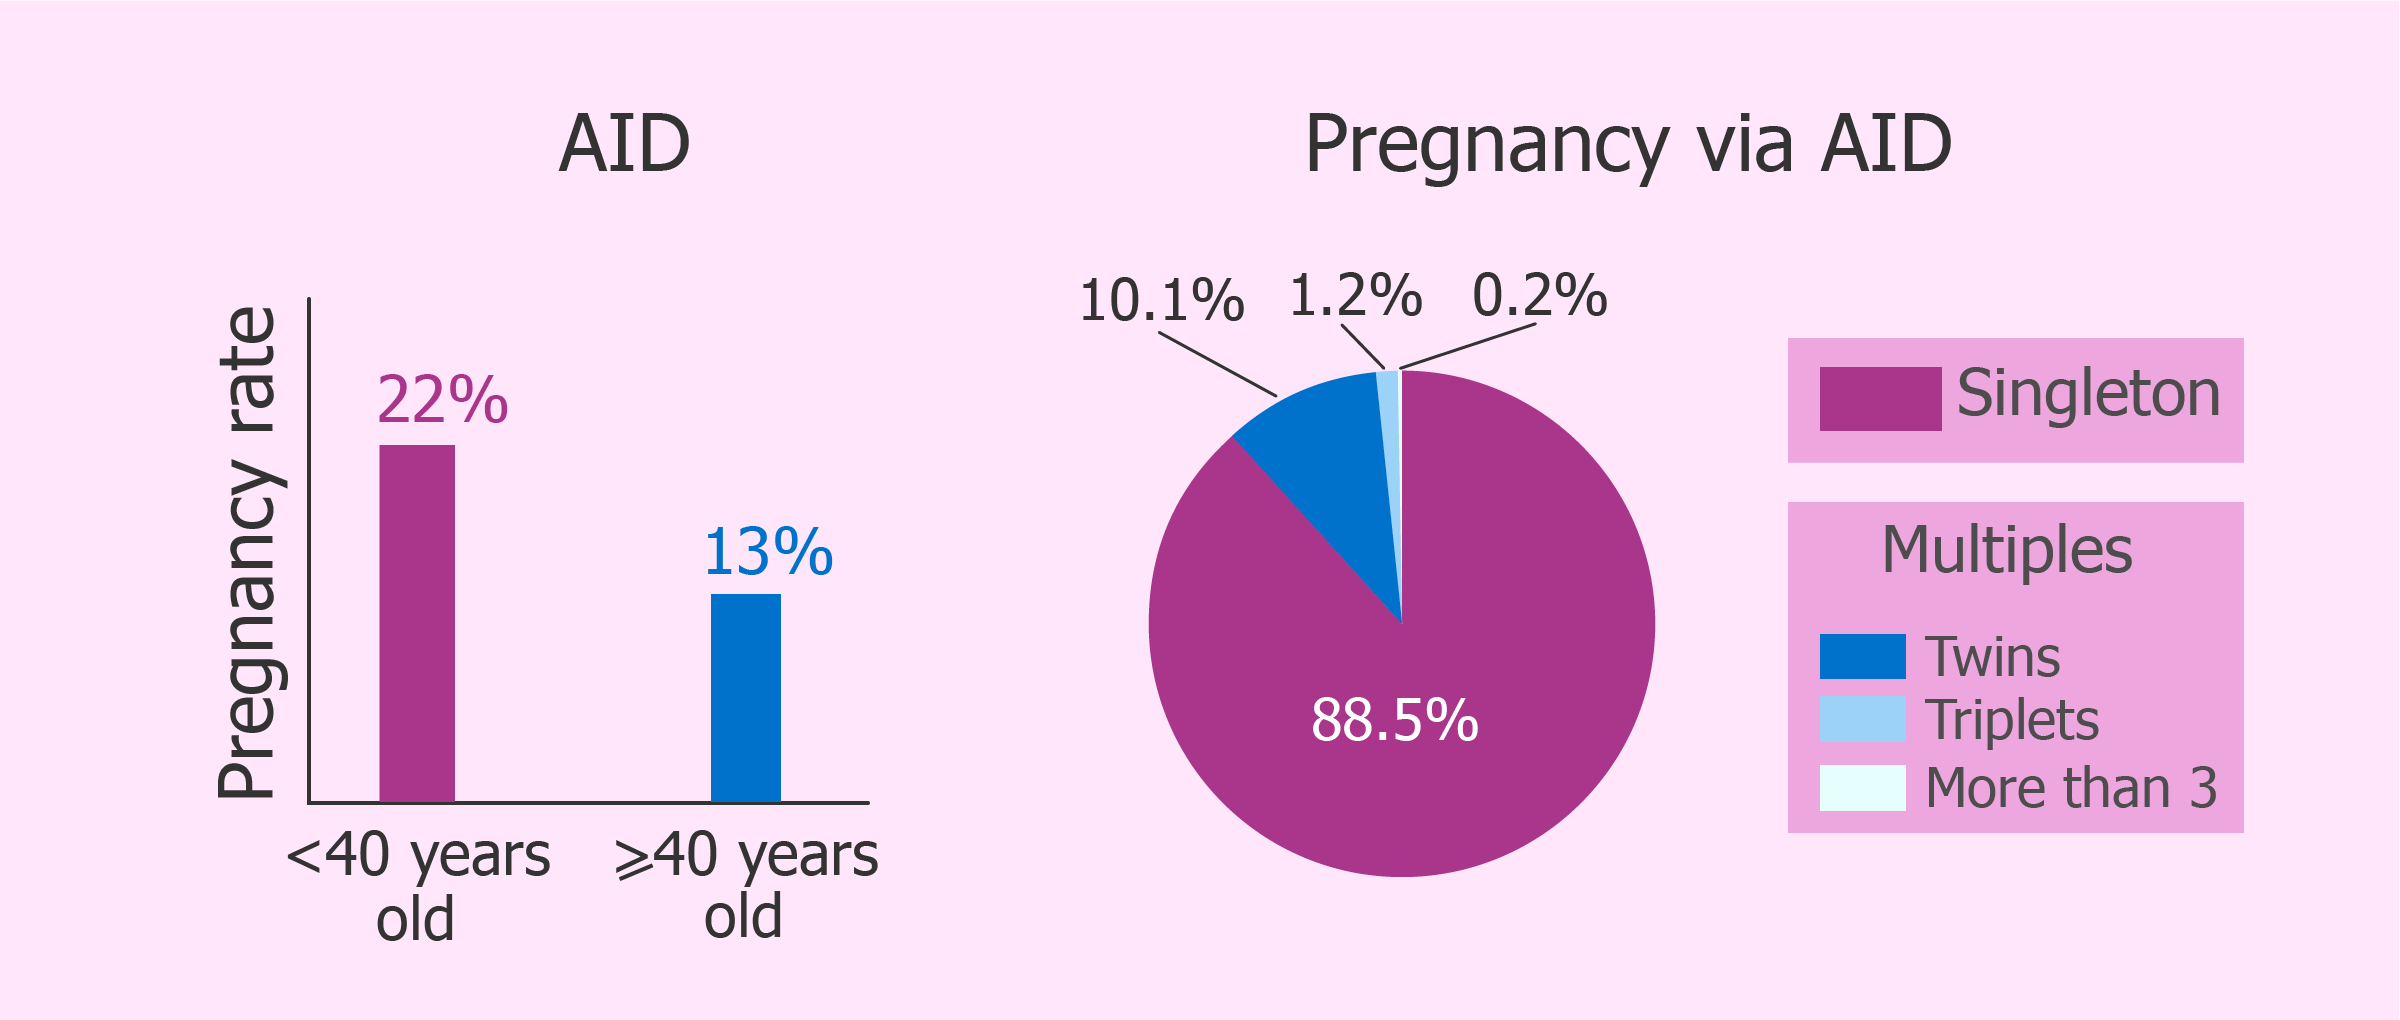 Success rates and percentage of multiple births with AID